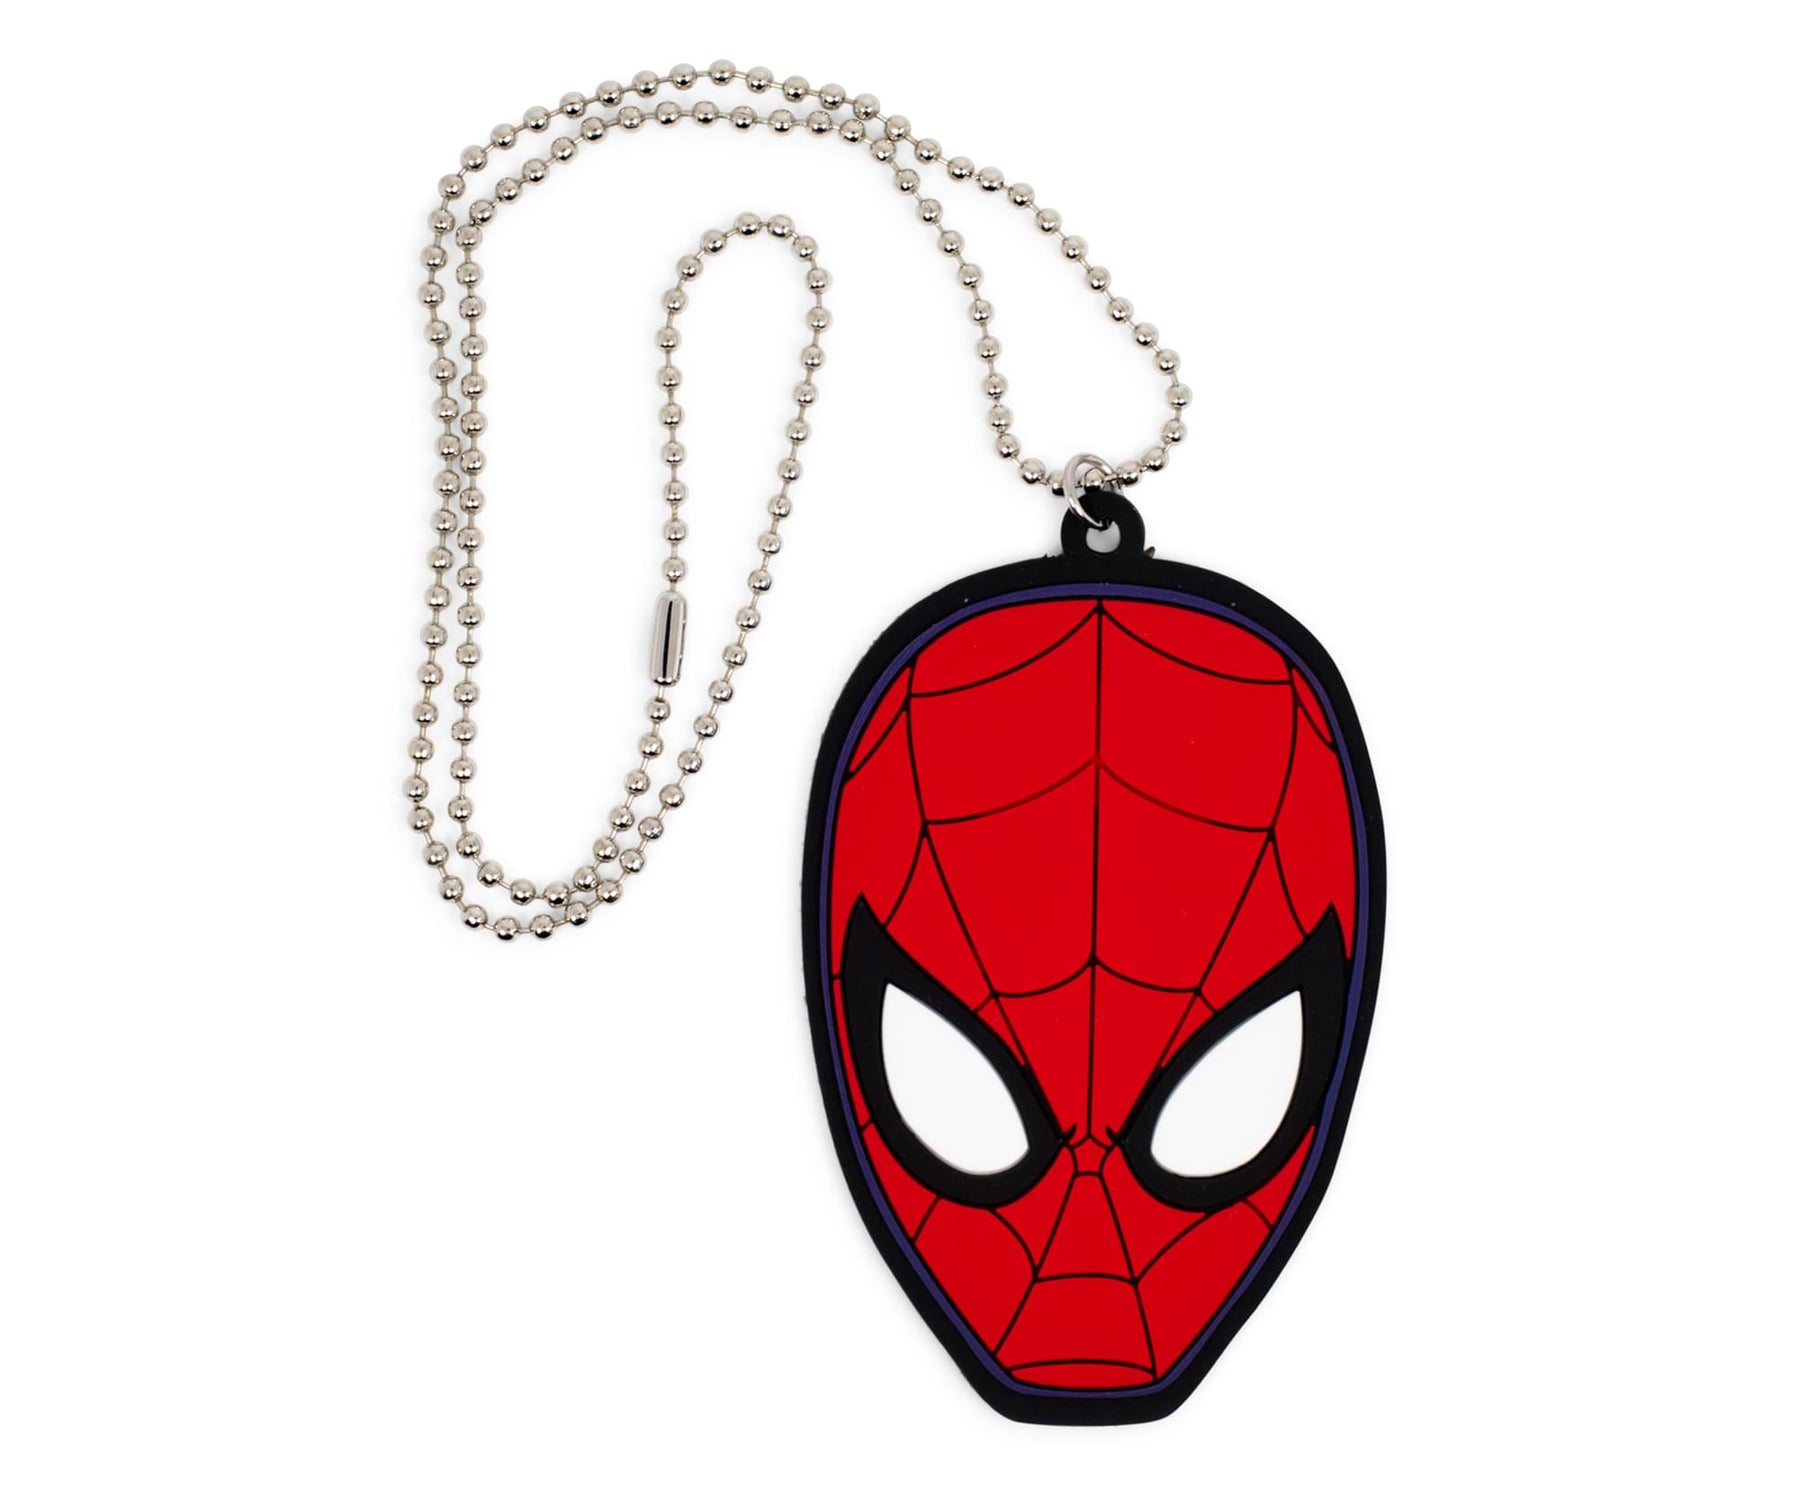 Marvel Spider-Man Printed Tin Case w/ Rubber Charm